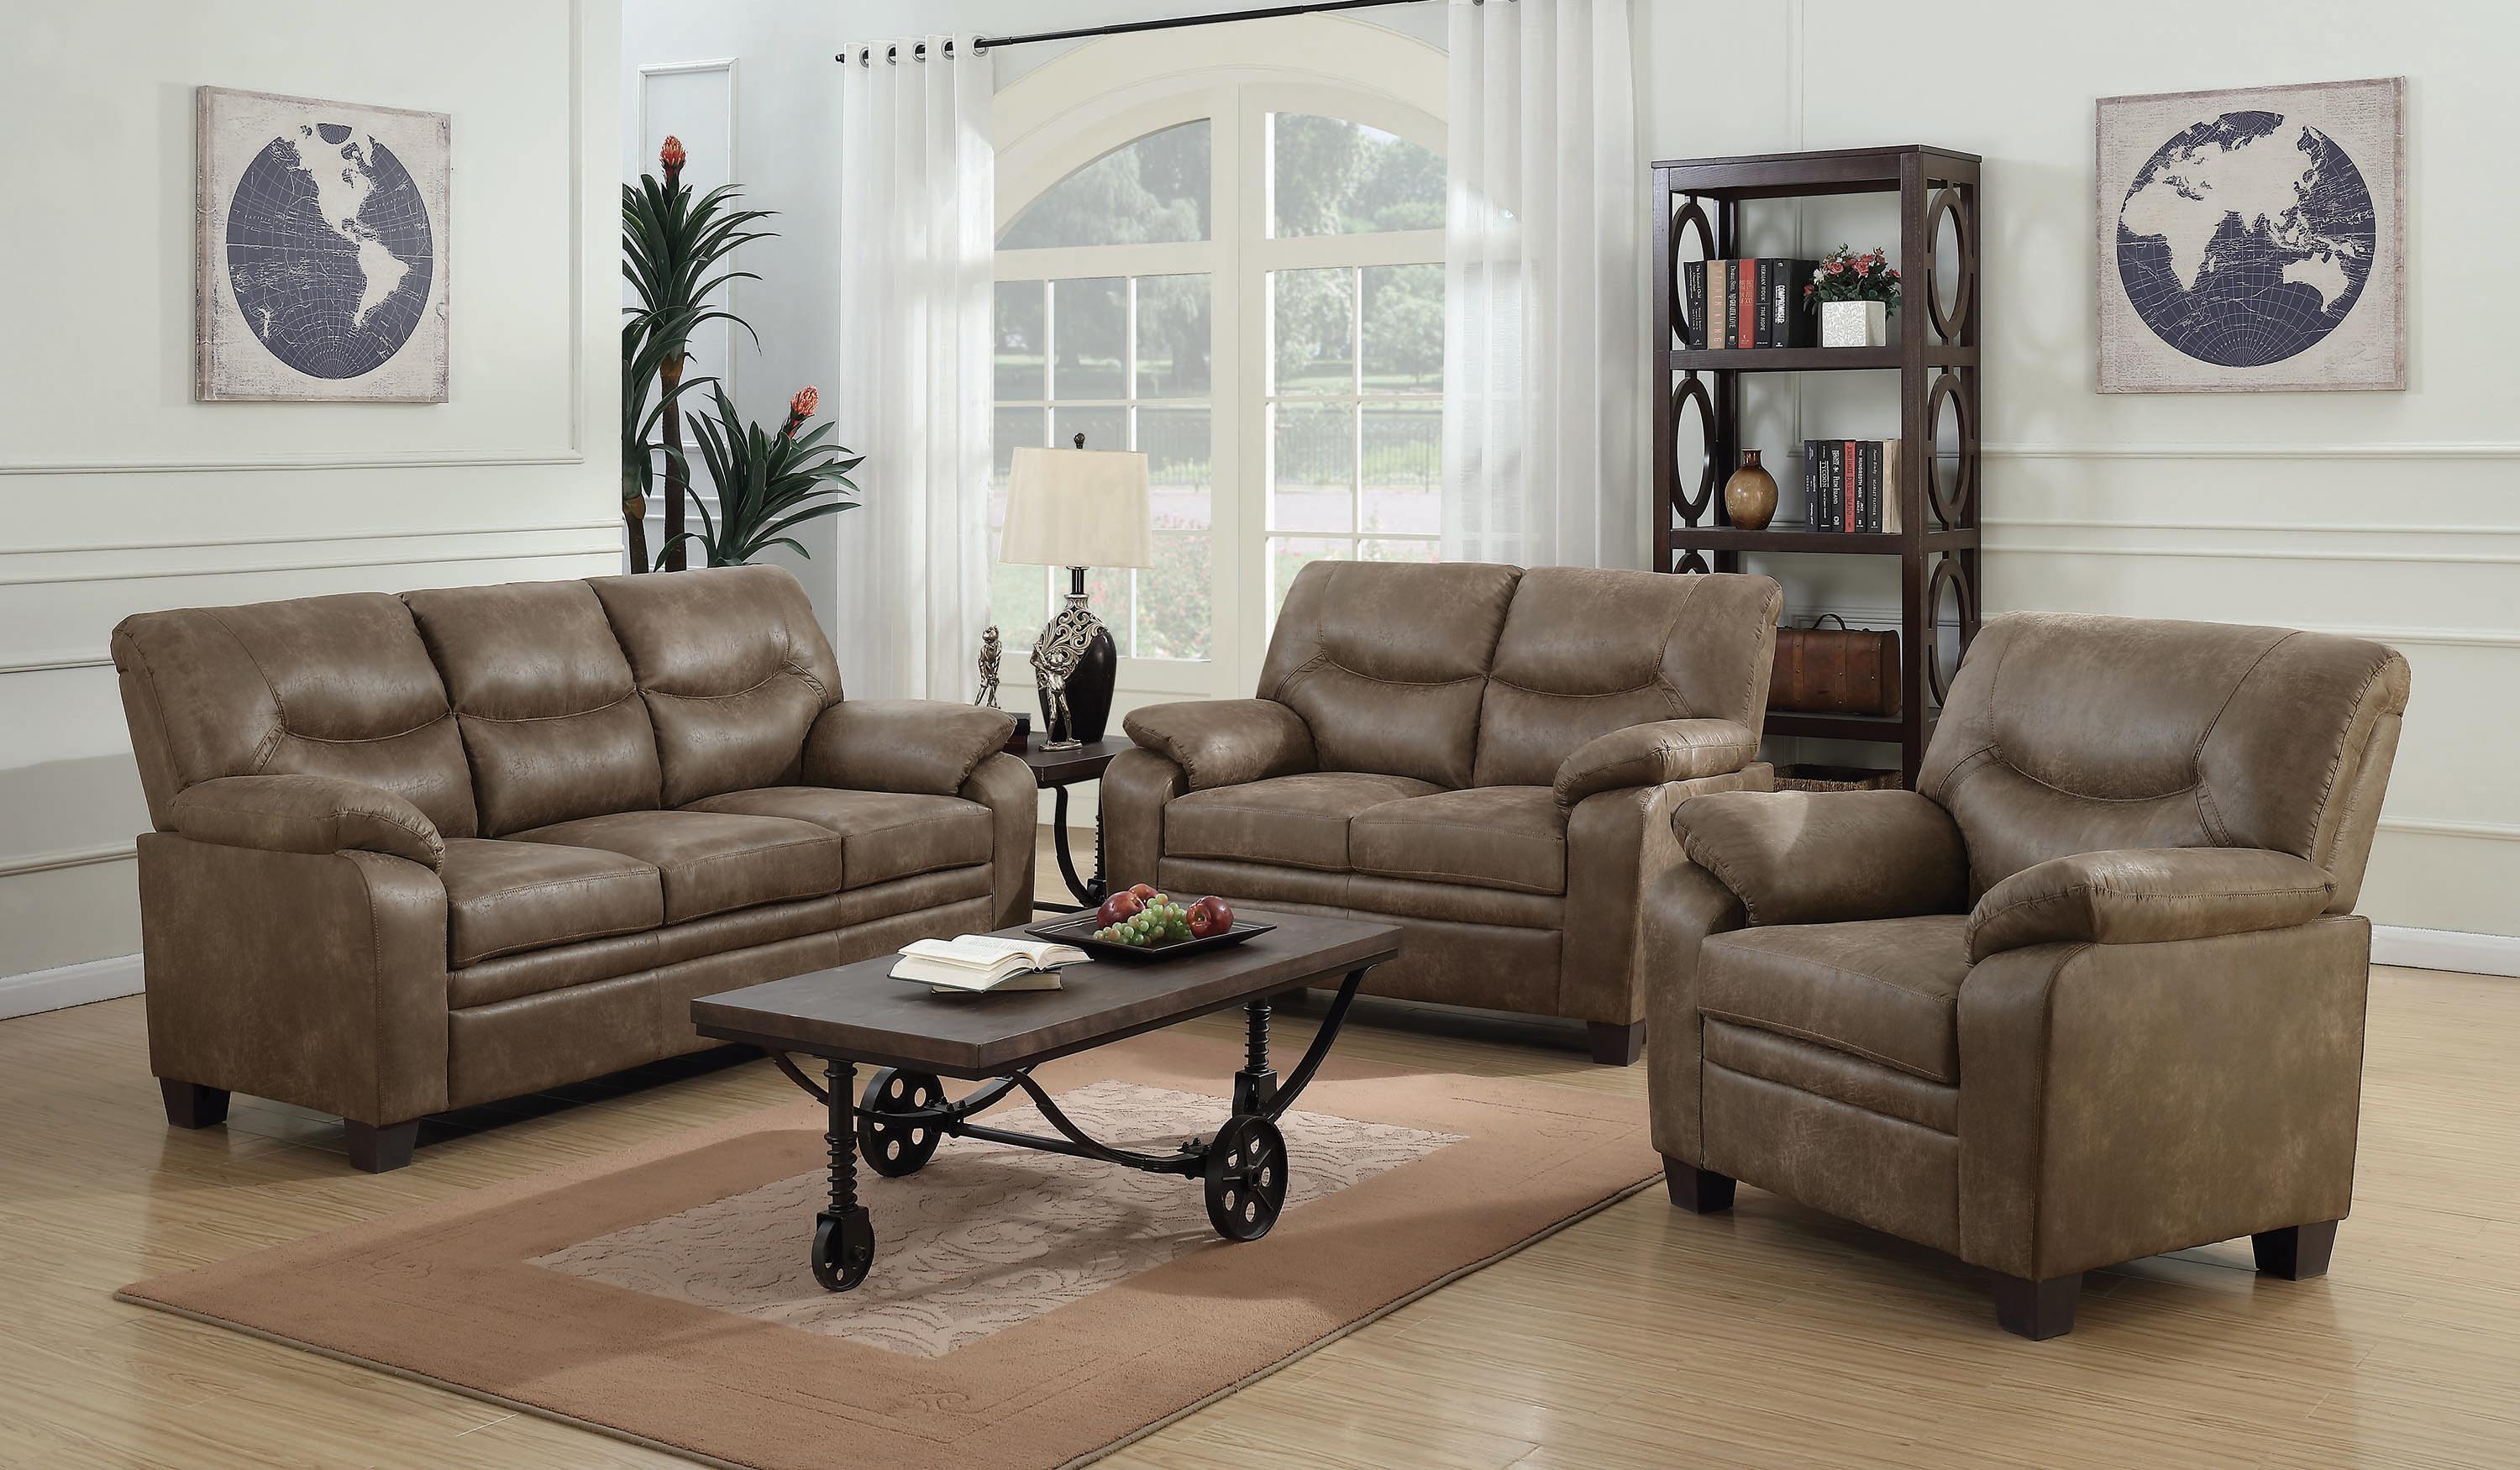 Classic Living Room Set 506561-S3 Meagan 506561-S3 in Brown 